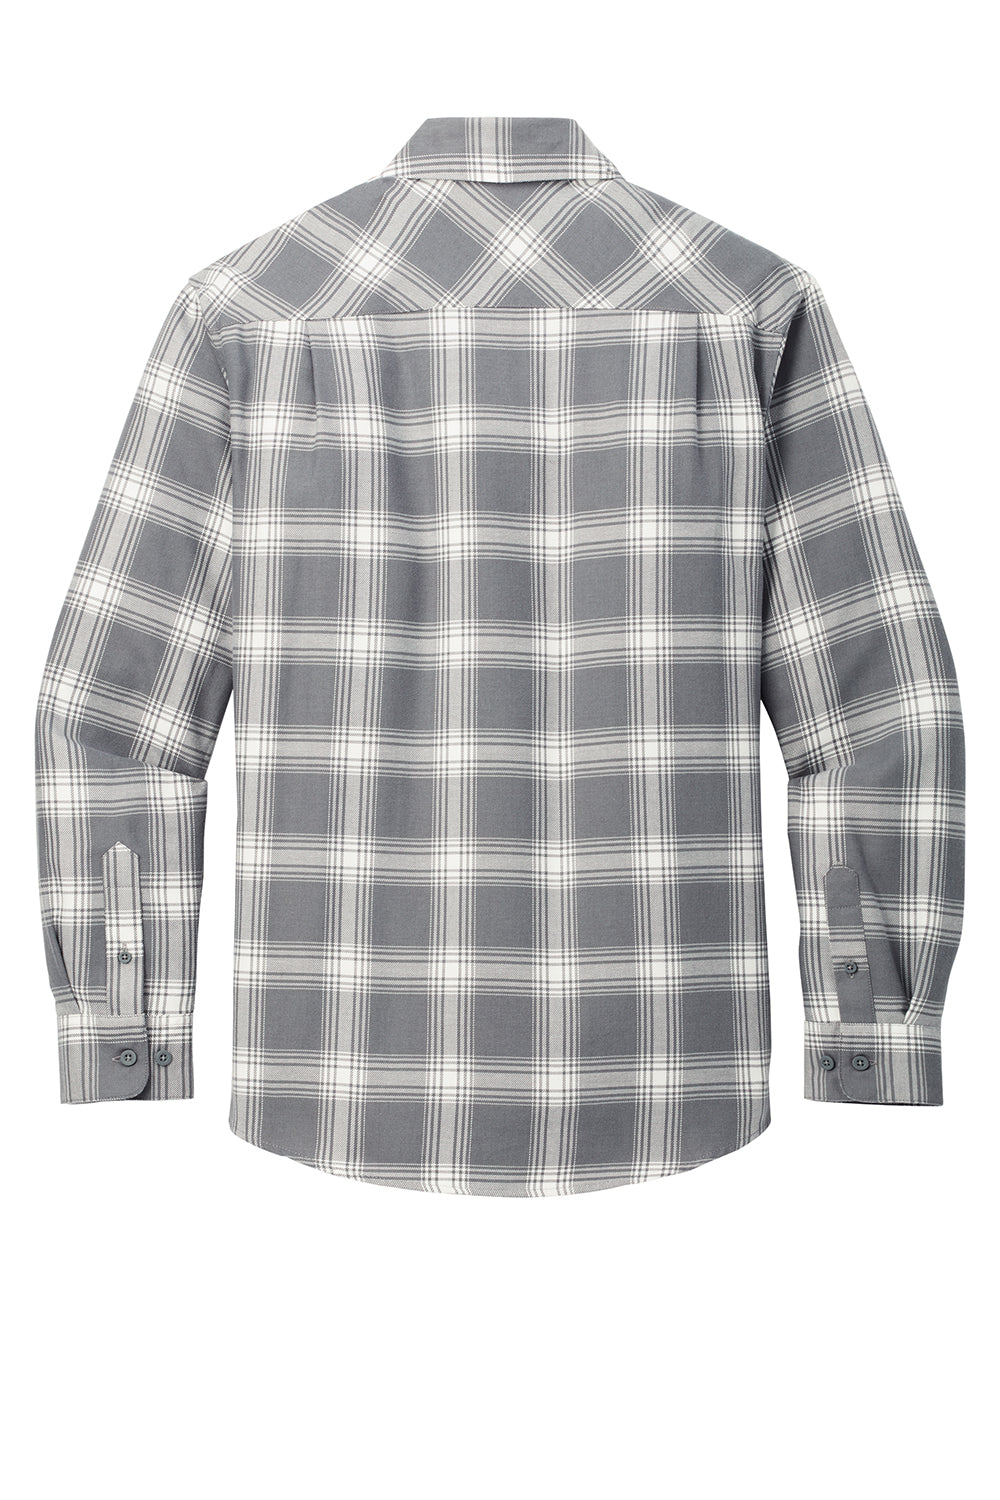 Port Authority W668 Mens Flannel Long Sleeve Button Down Shirt w/ Double Pockets Grey/Cream Plaid Flat Back